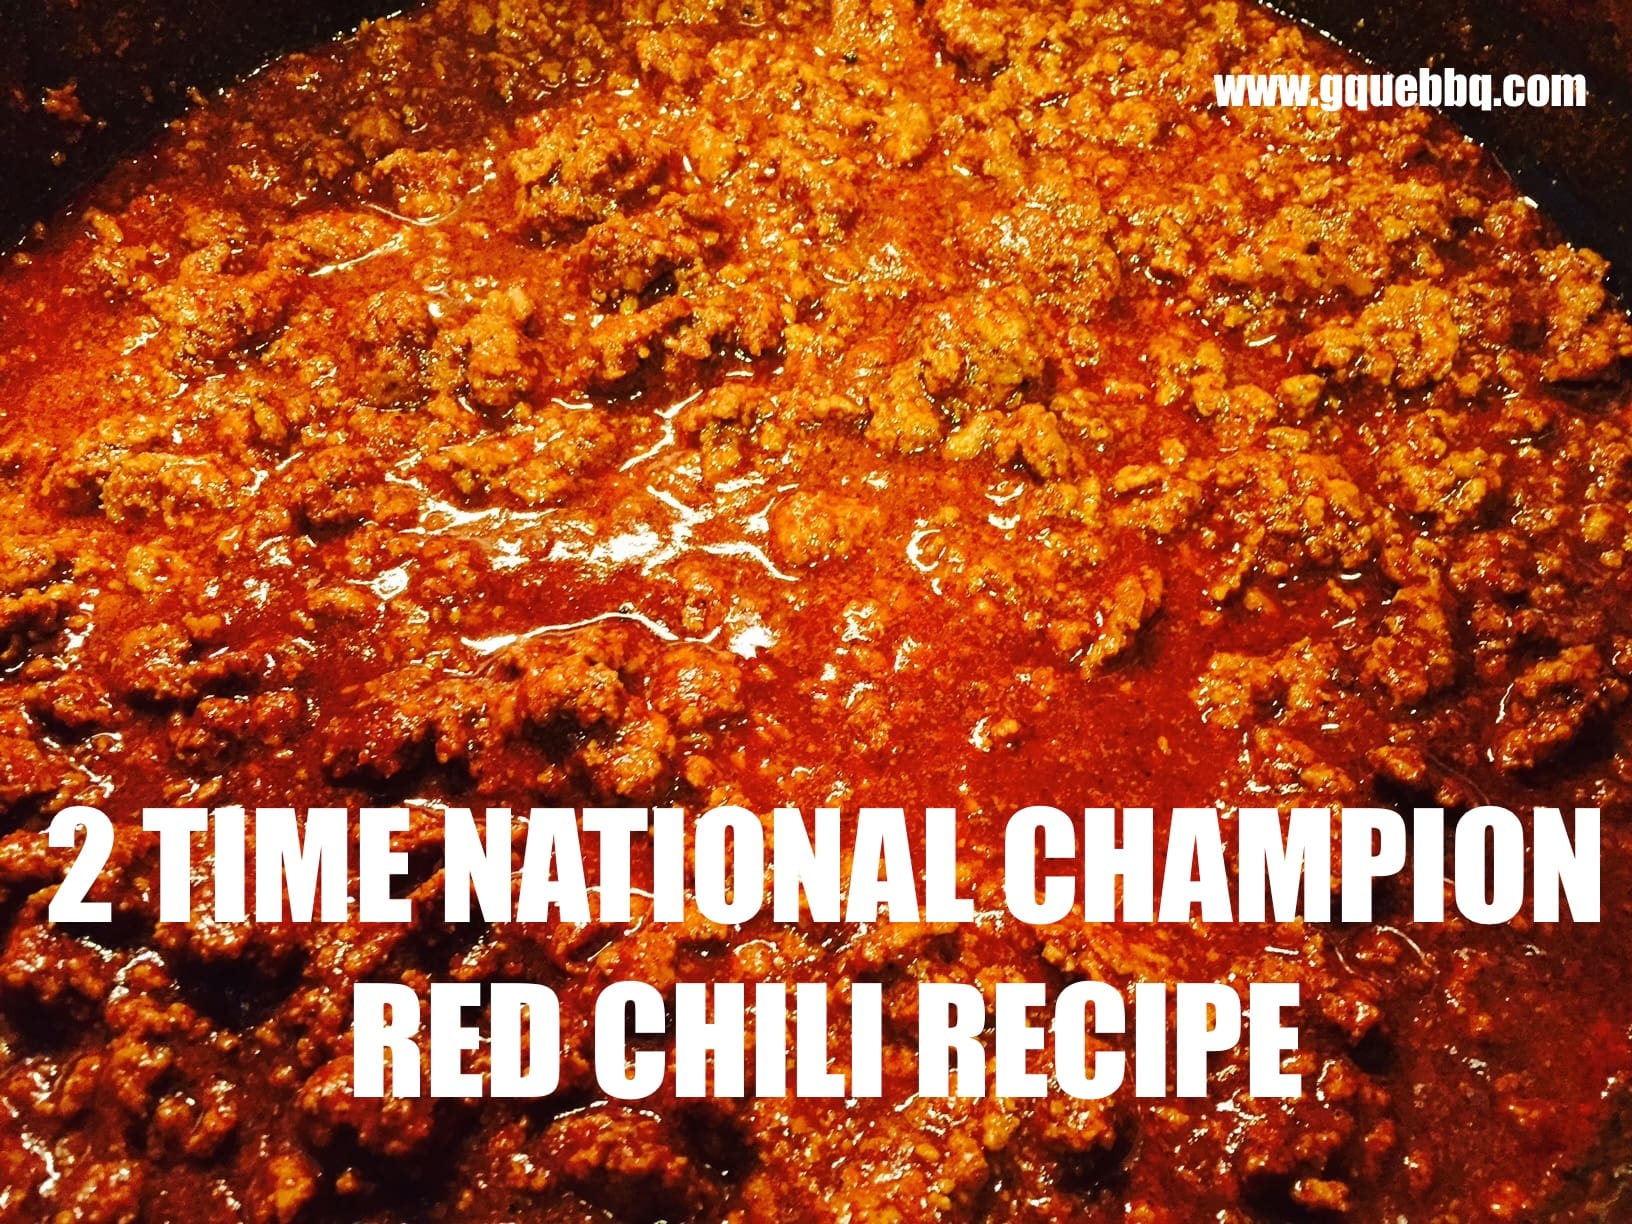 2 Time National Champion Margaret Nadeau’s Red Chili Recipe